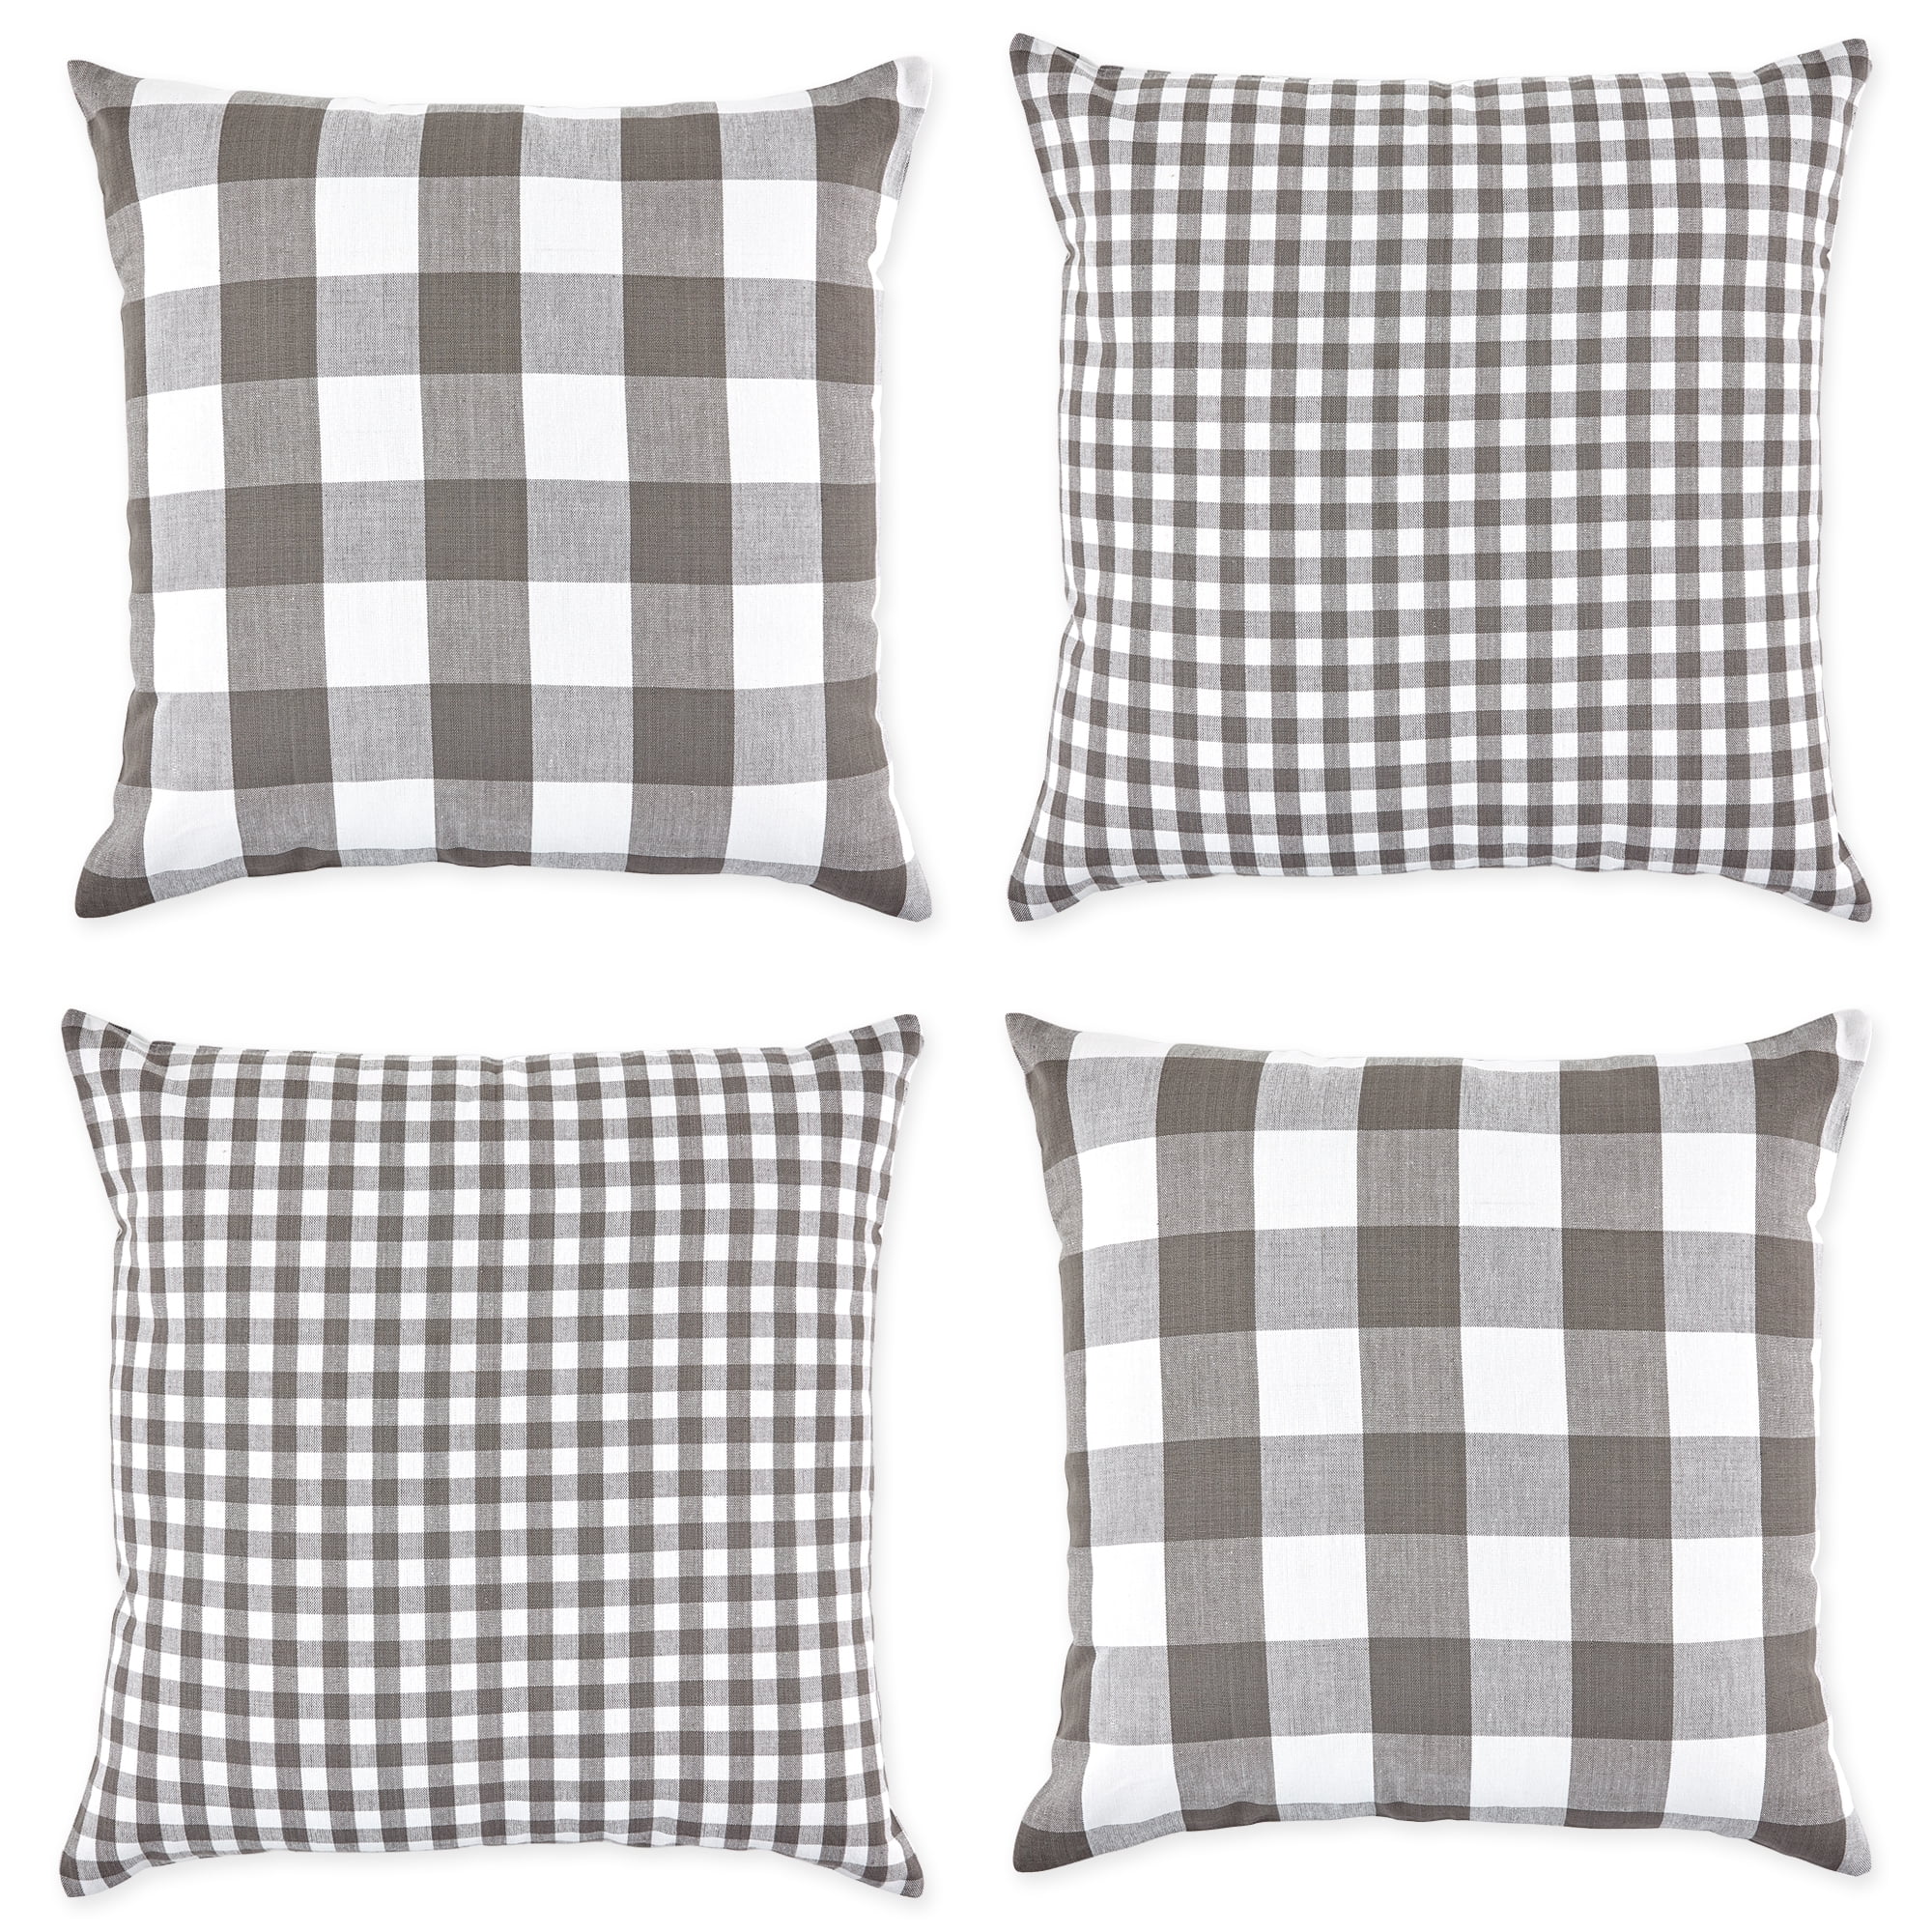 DII Throw Pillow Cover Collection Decorative Square 18x18 Autumn Plaid 4 Piece